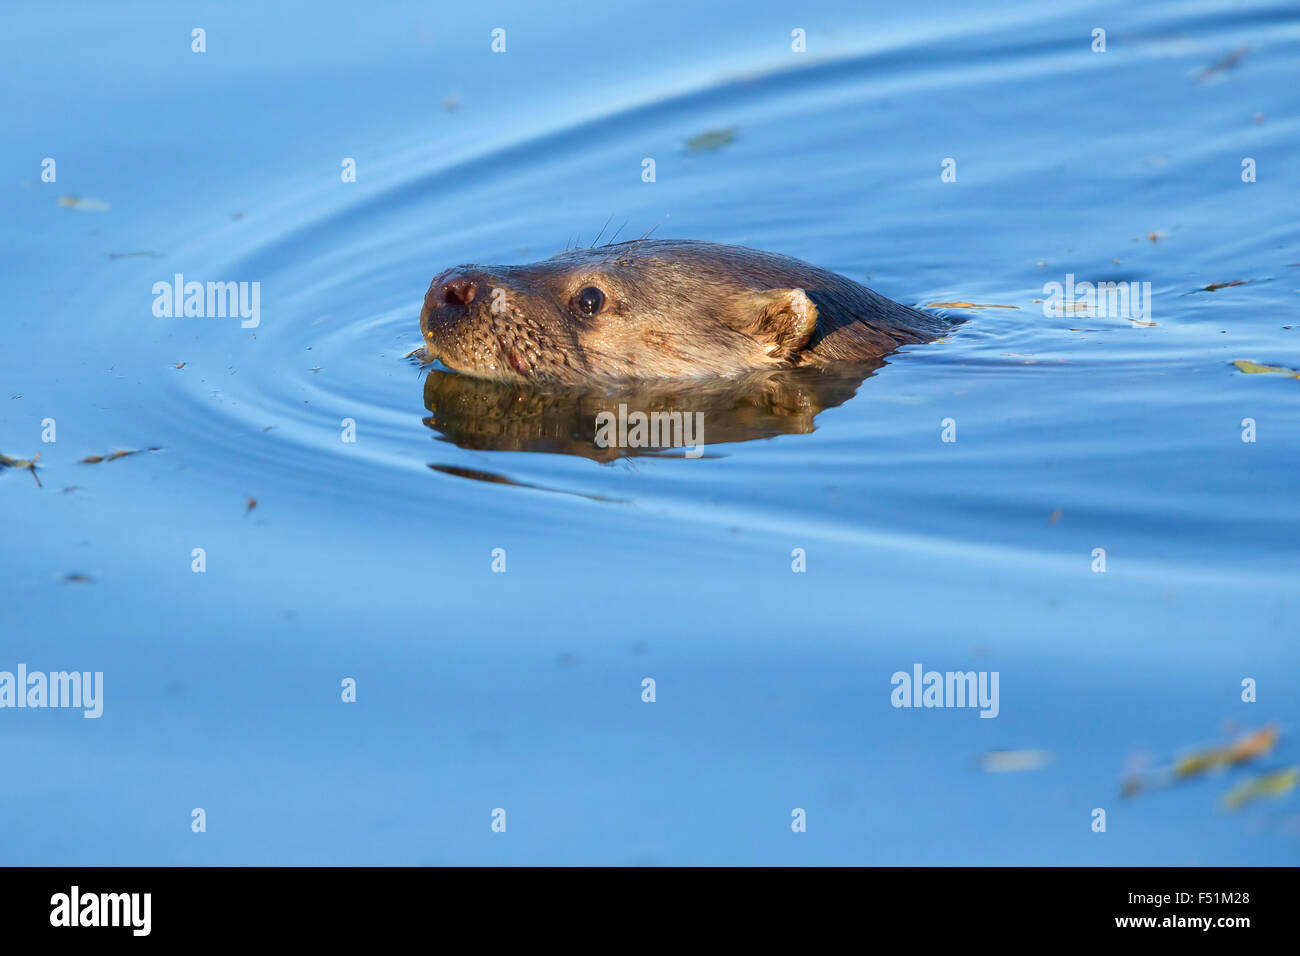 Eropean Otter, swimming in blue water, Campania, Italy (Lutra lutra) Stock Photo